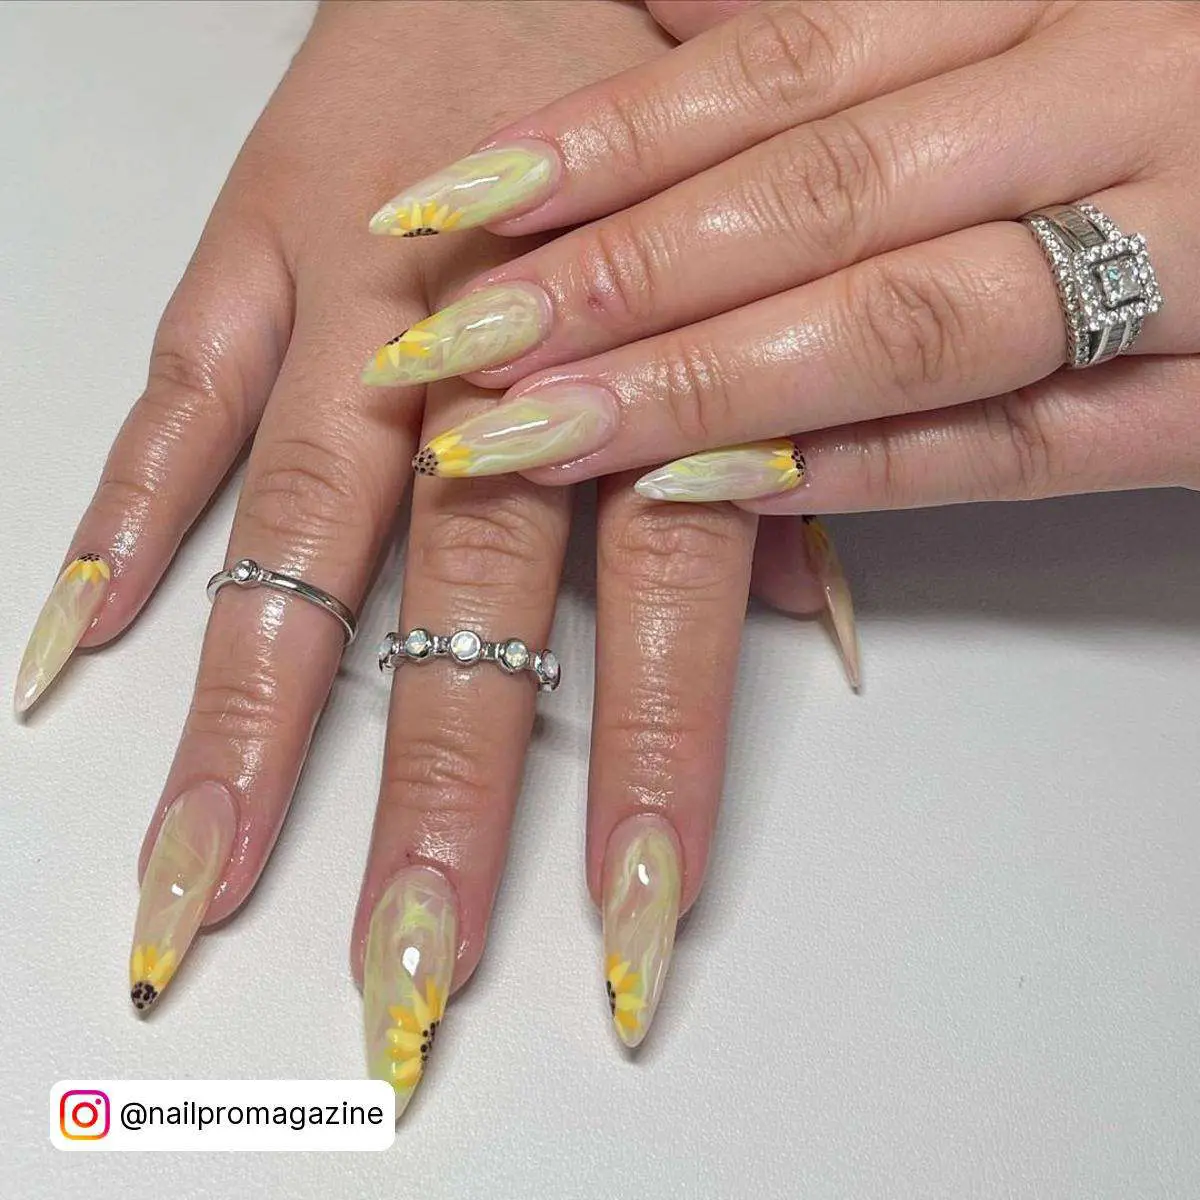 Nail Design With Sunflowers